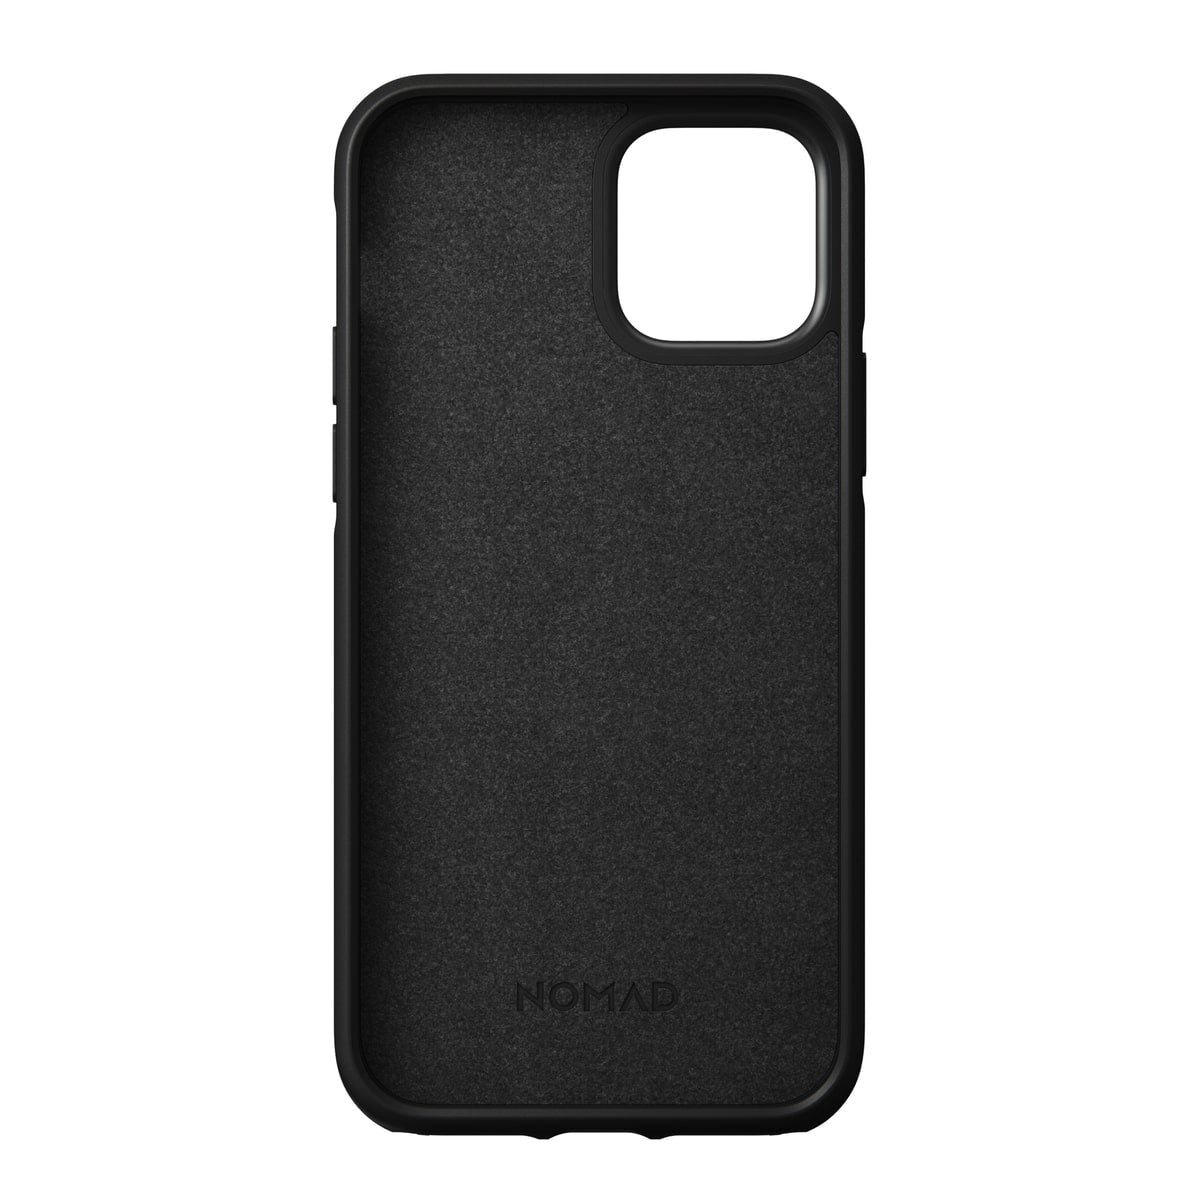 Husa Piele Naturala Nomad Rugged - iPhone 12 & Pro - NM21gN0R00 - 856500019451 - 14